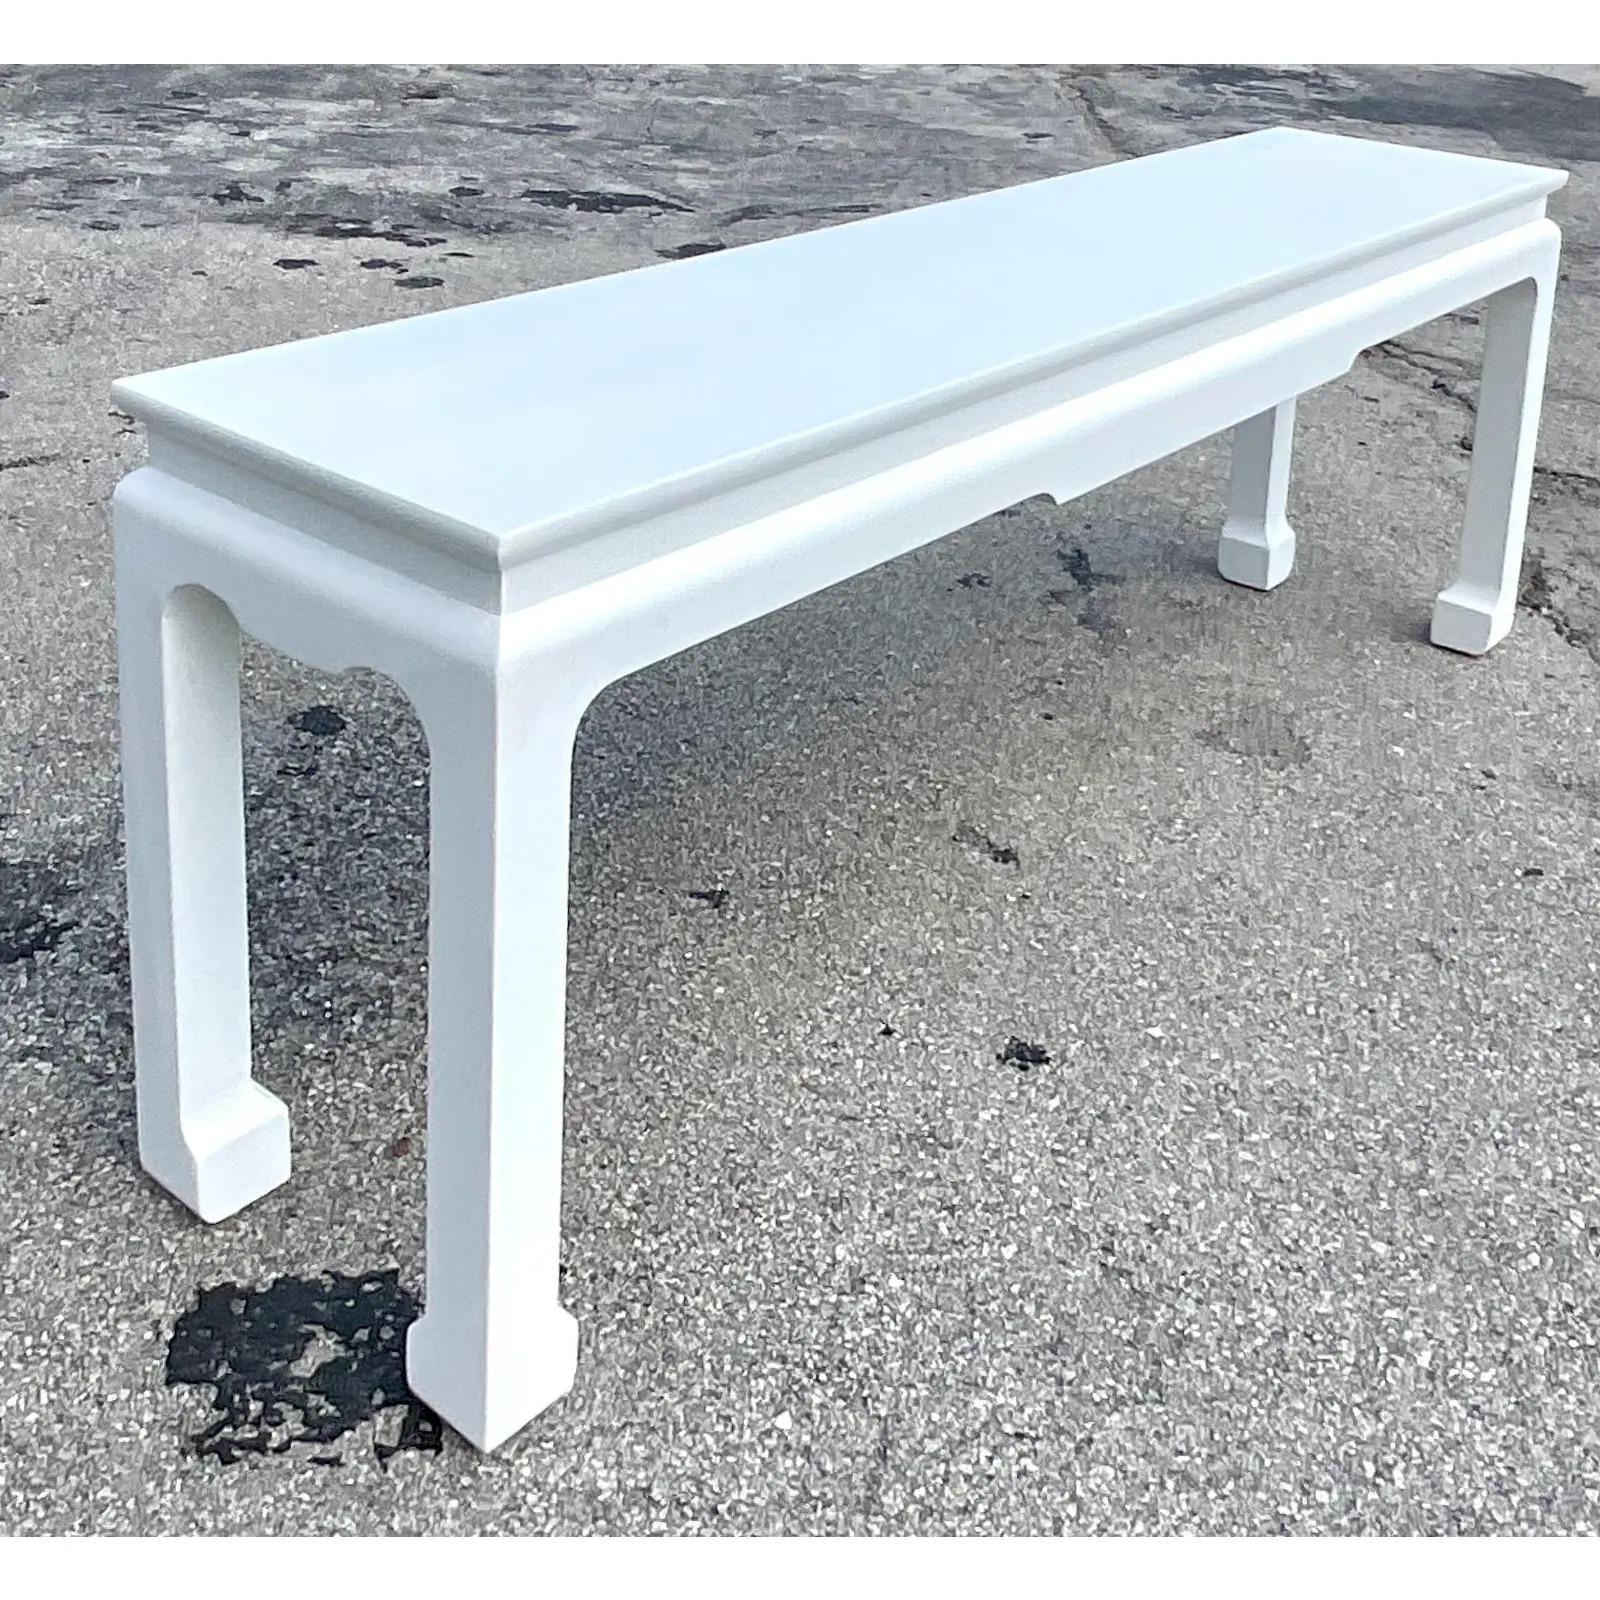 Fantastic vintage Asian Console table. A chic Ming design in a bright white finish. Acquired from a Palm Beach estate.